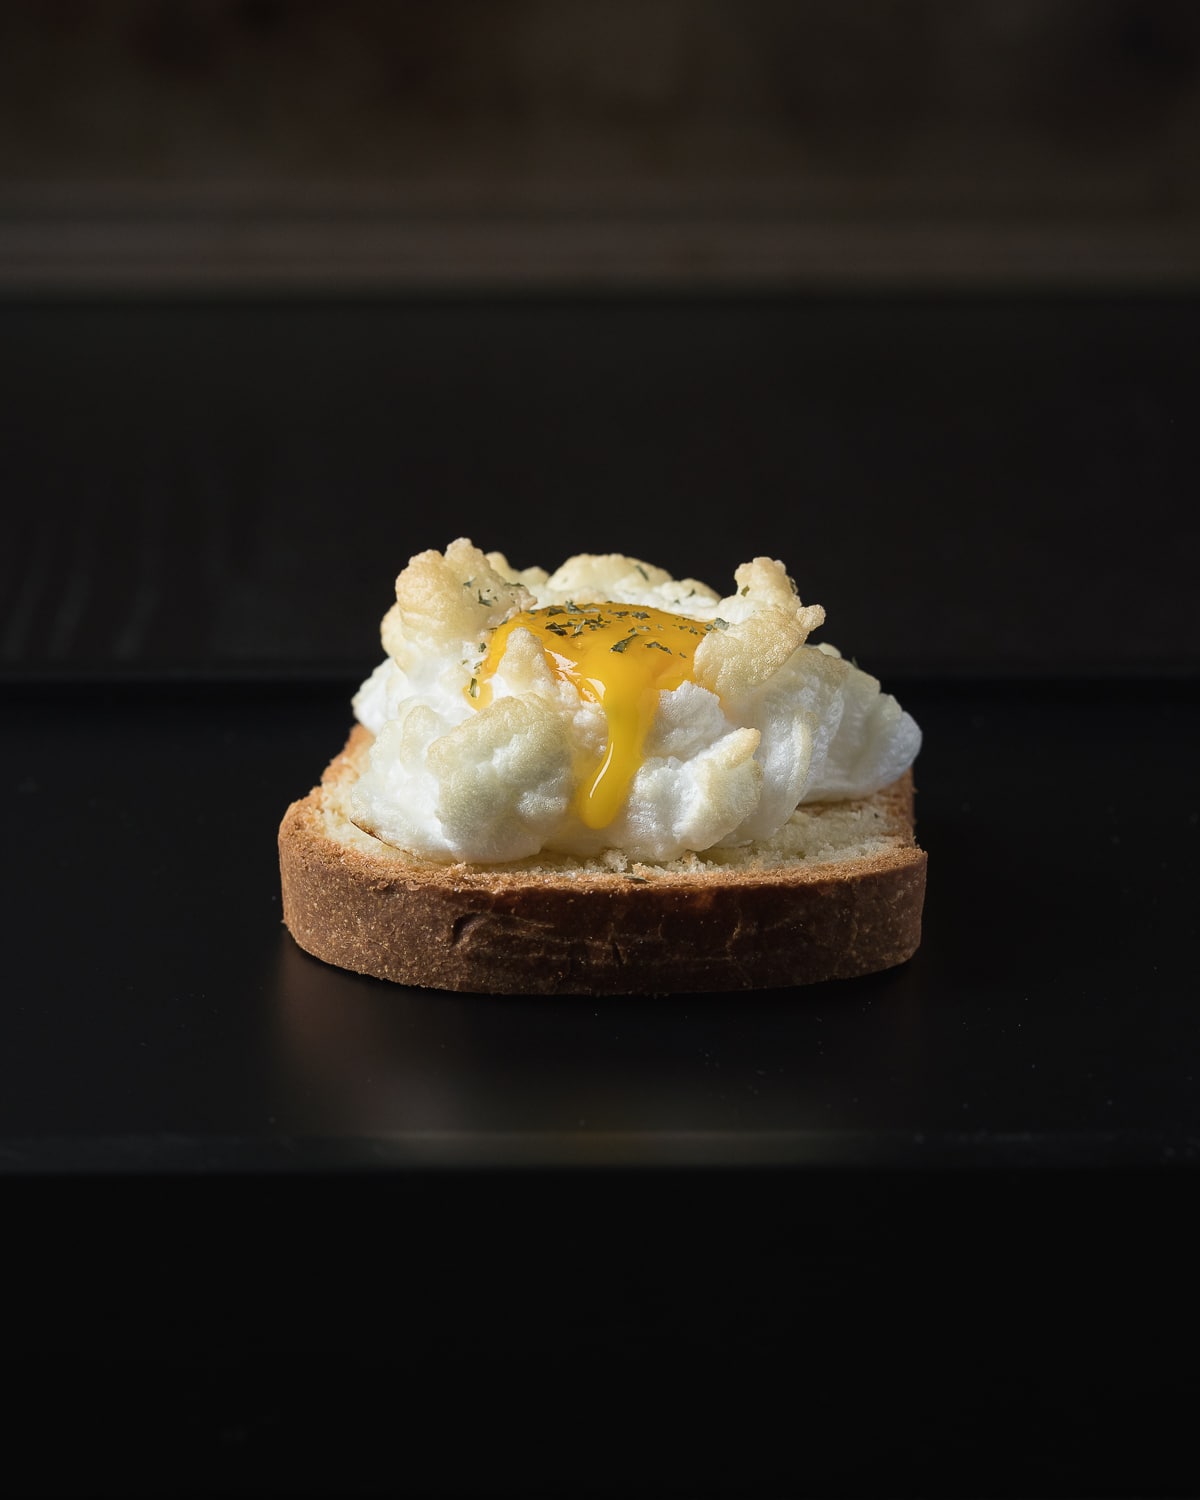 A side view of a cloud egg on toast, the popped yolk is dribbling down the side.